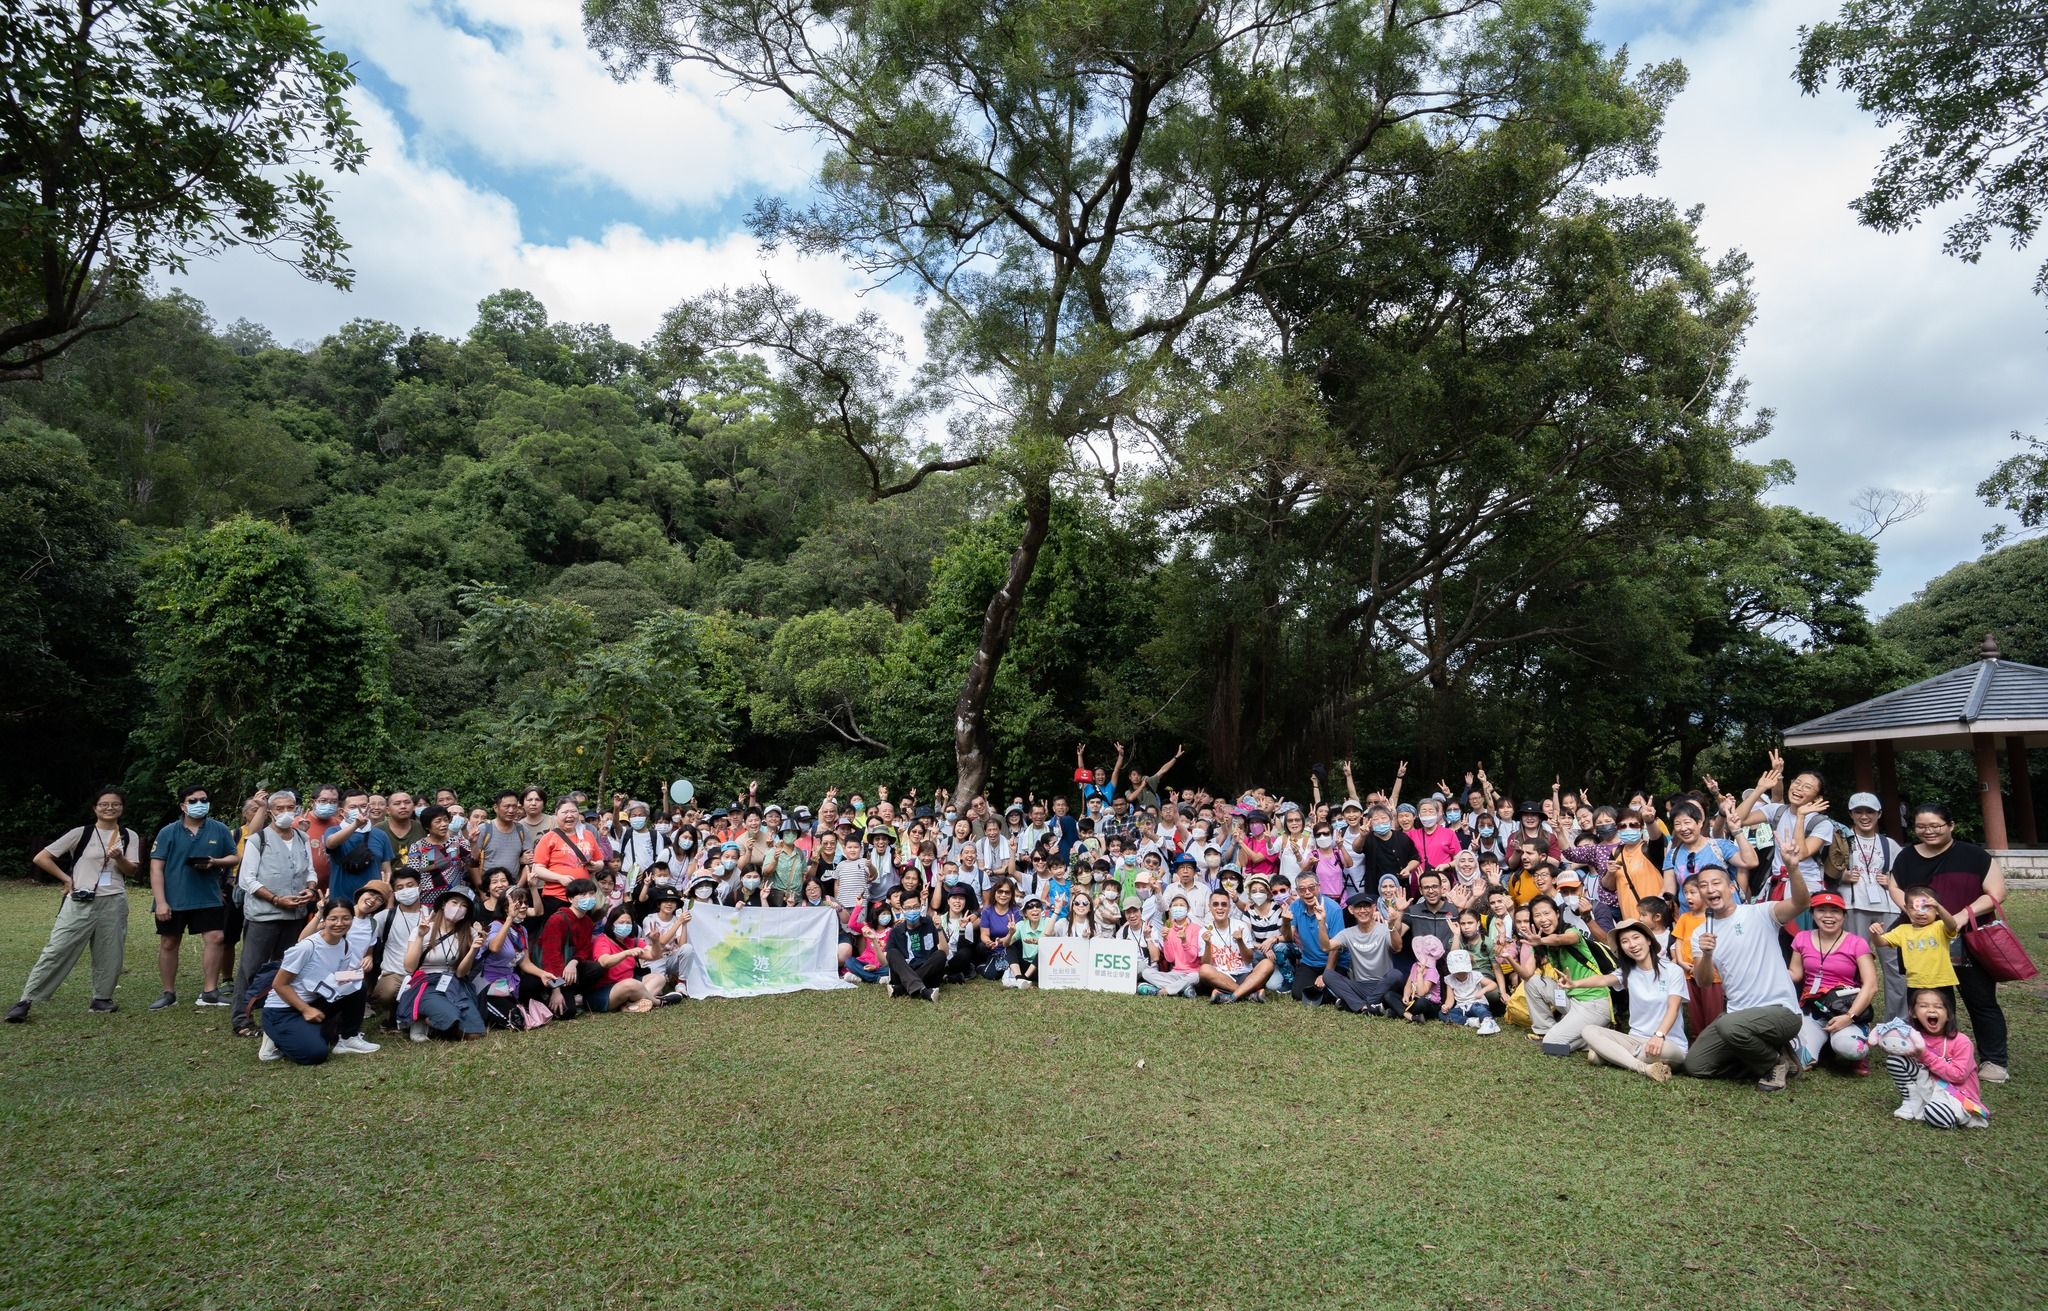 Tracy and her team organizing the first Hong Kong Tree Hug Day for 300 people to explore nature together and try tree-hugging to beat the pandemic blues. Credit: Fullness Social Enterprises Society.